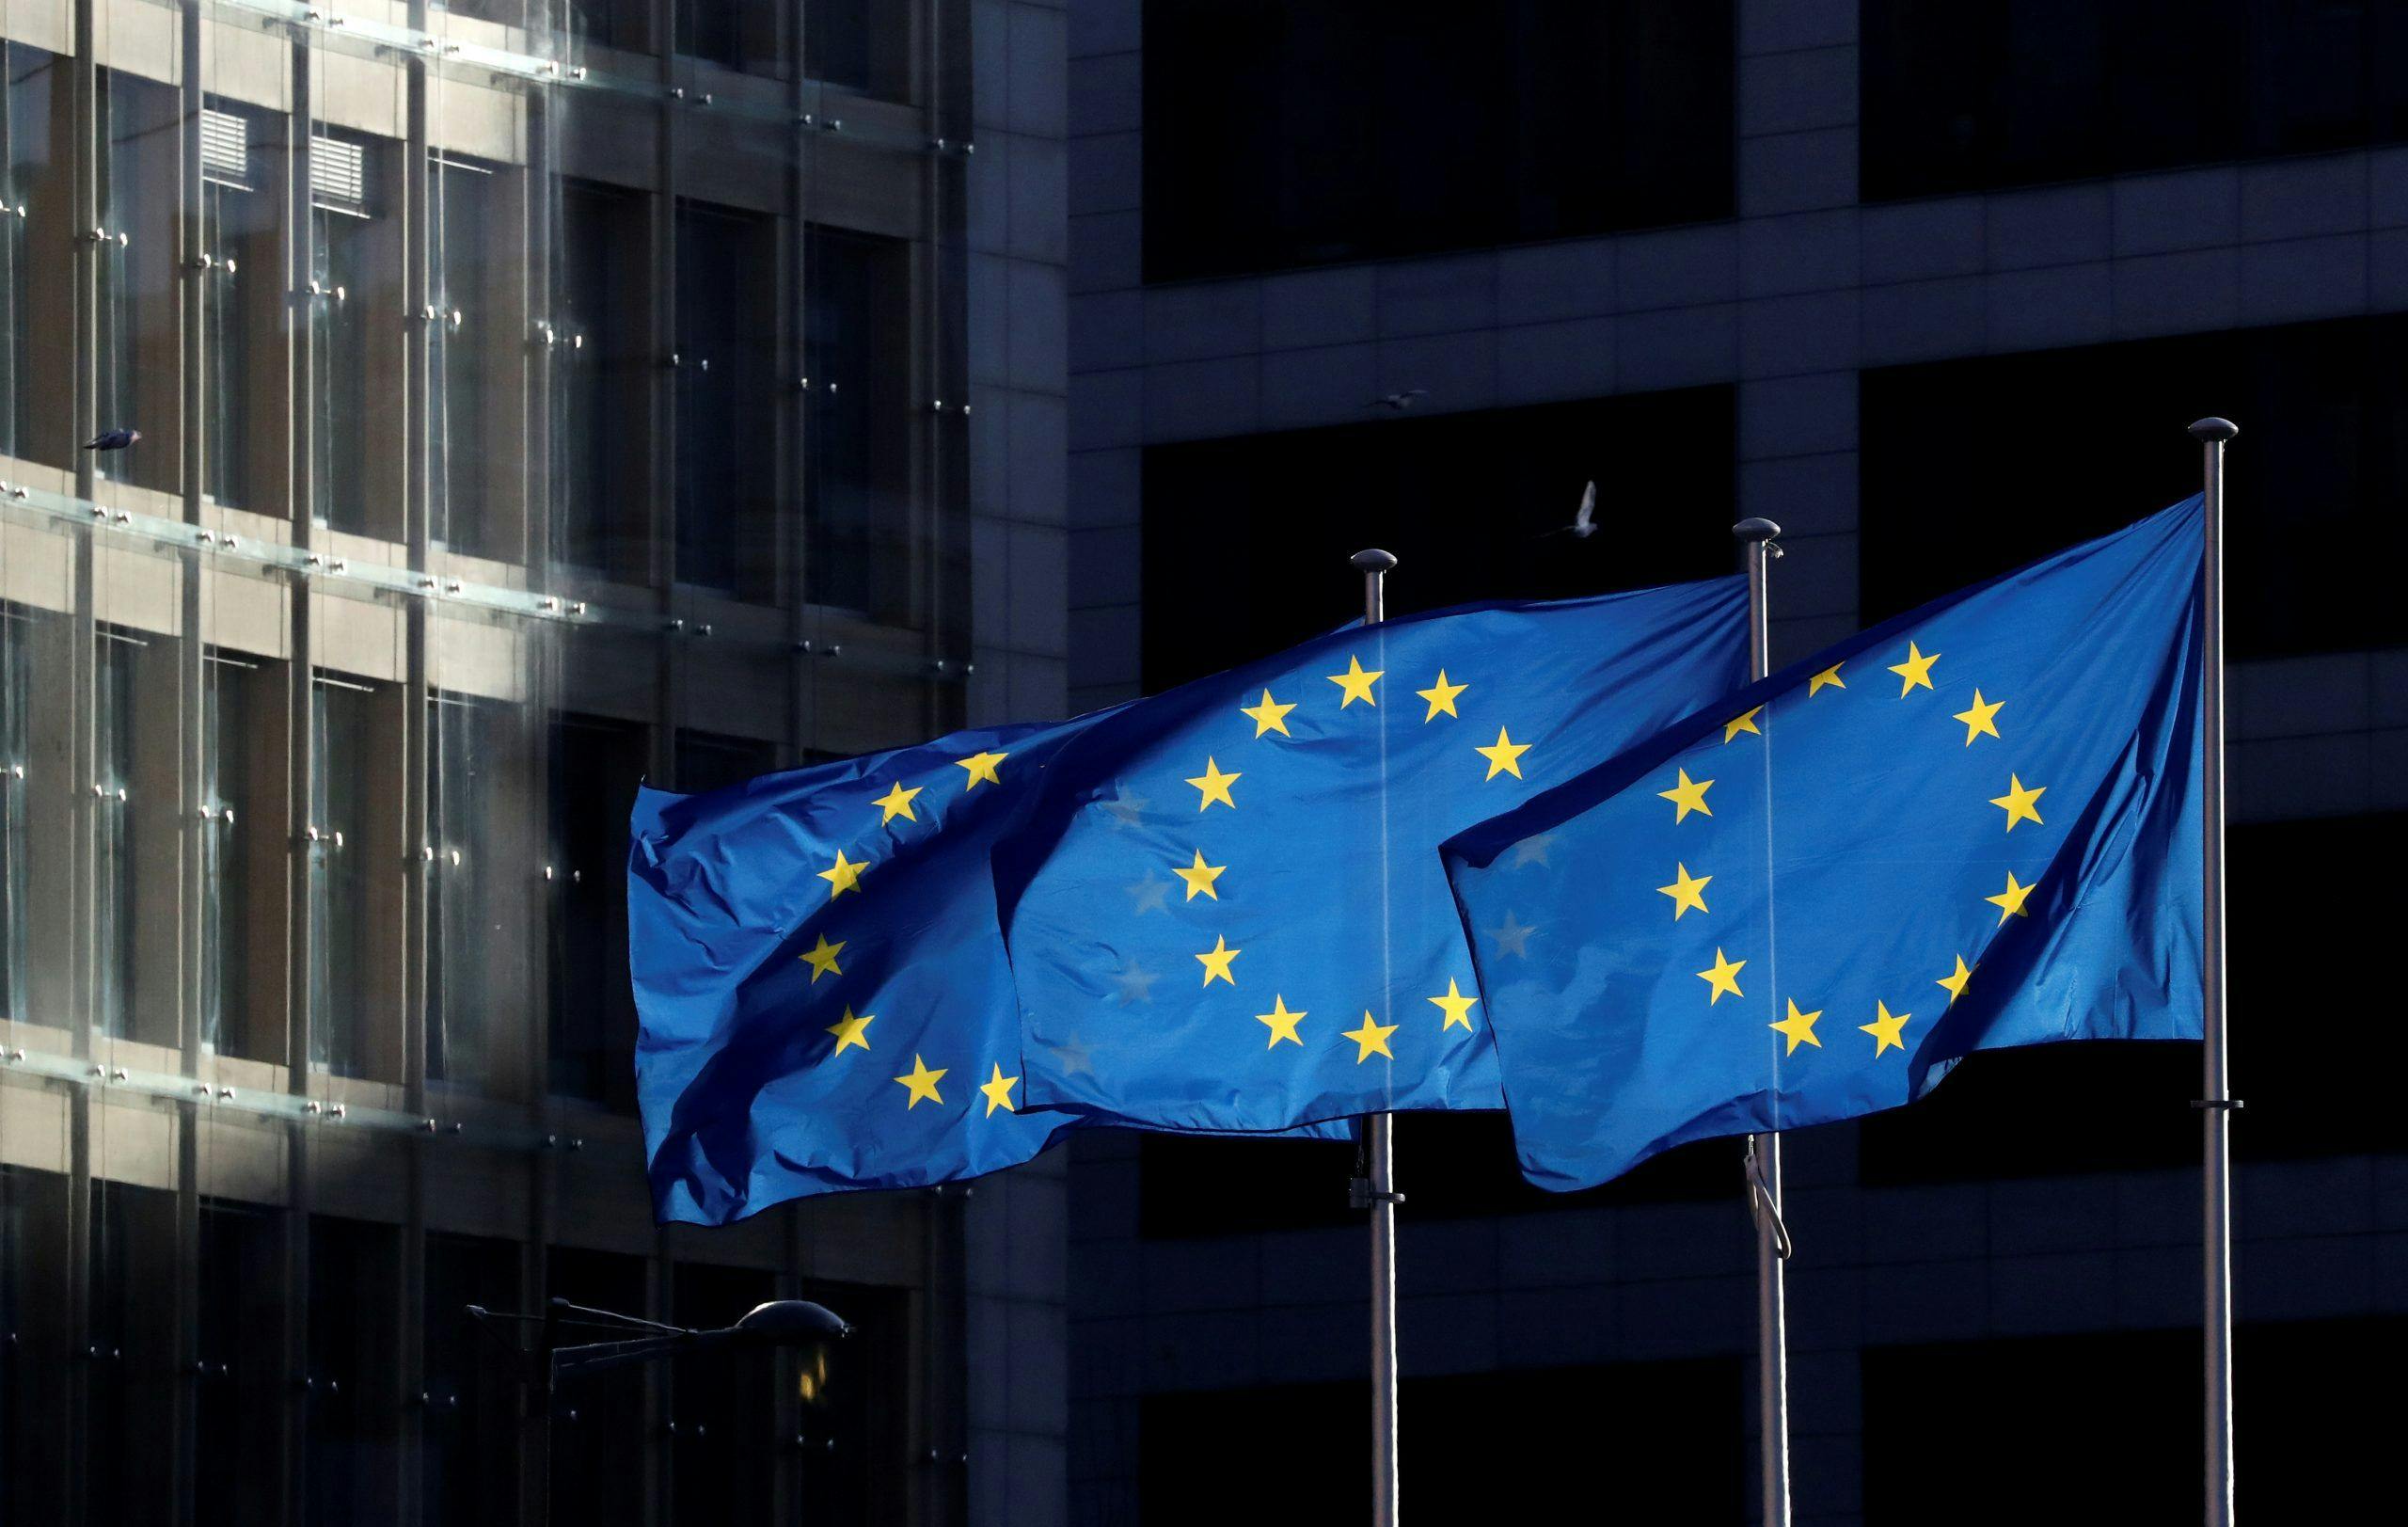 EU Under Pressure to Make Decisions on Data Sharing